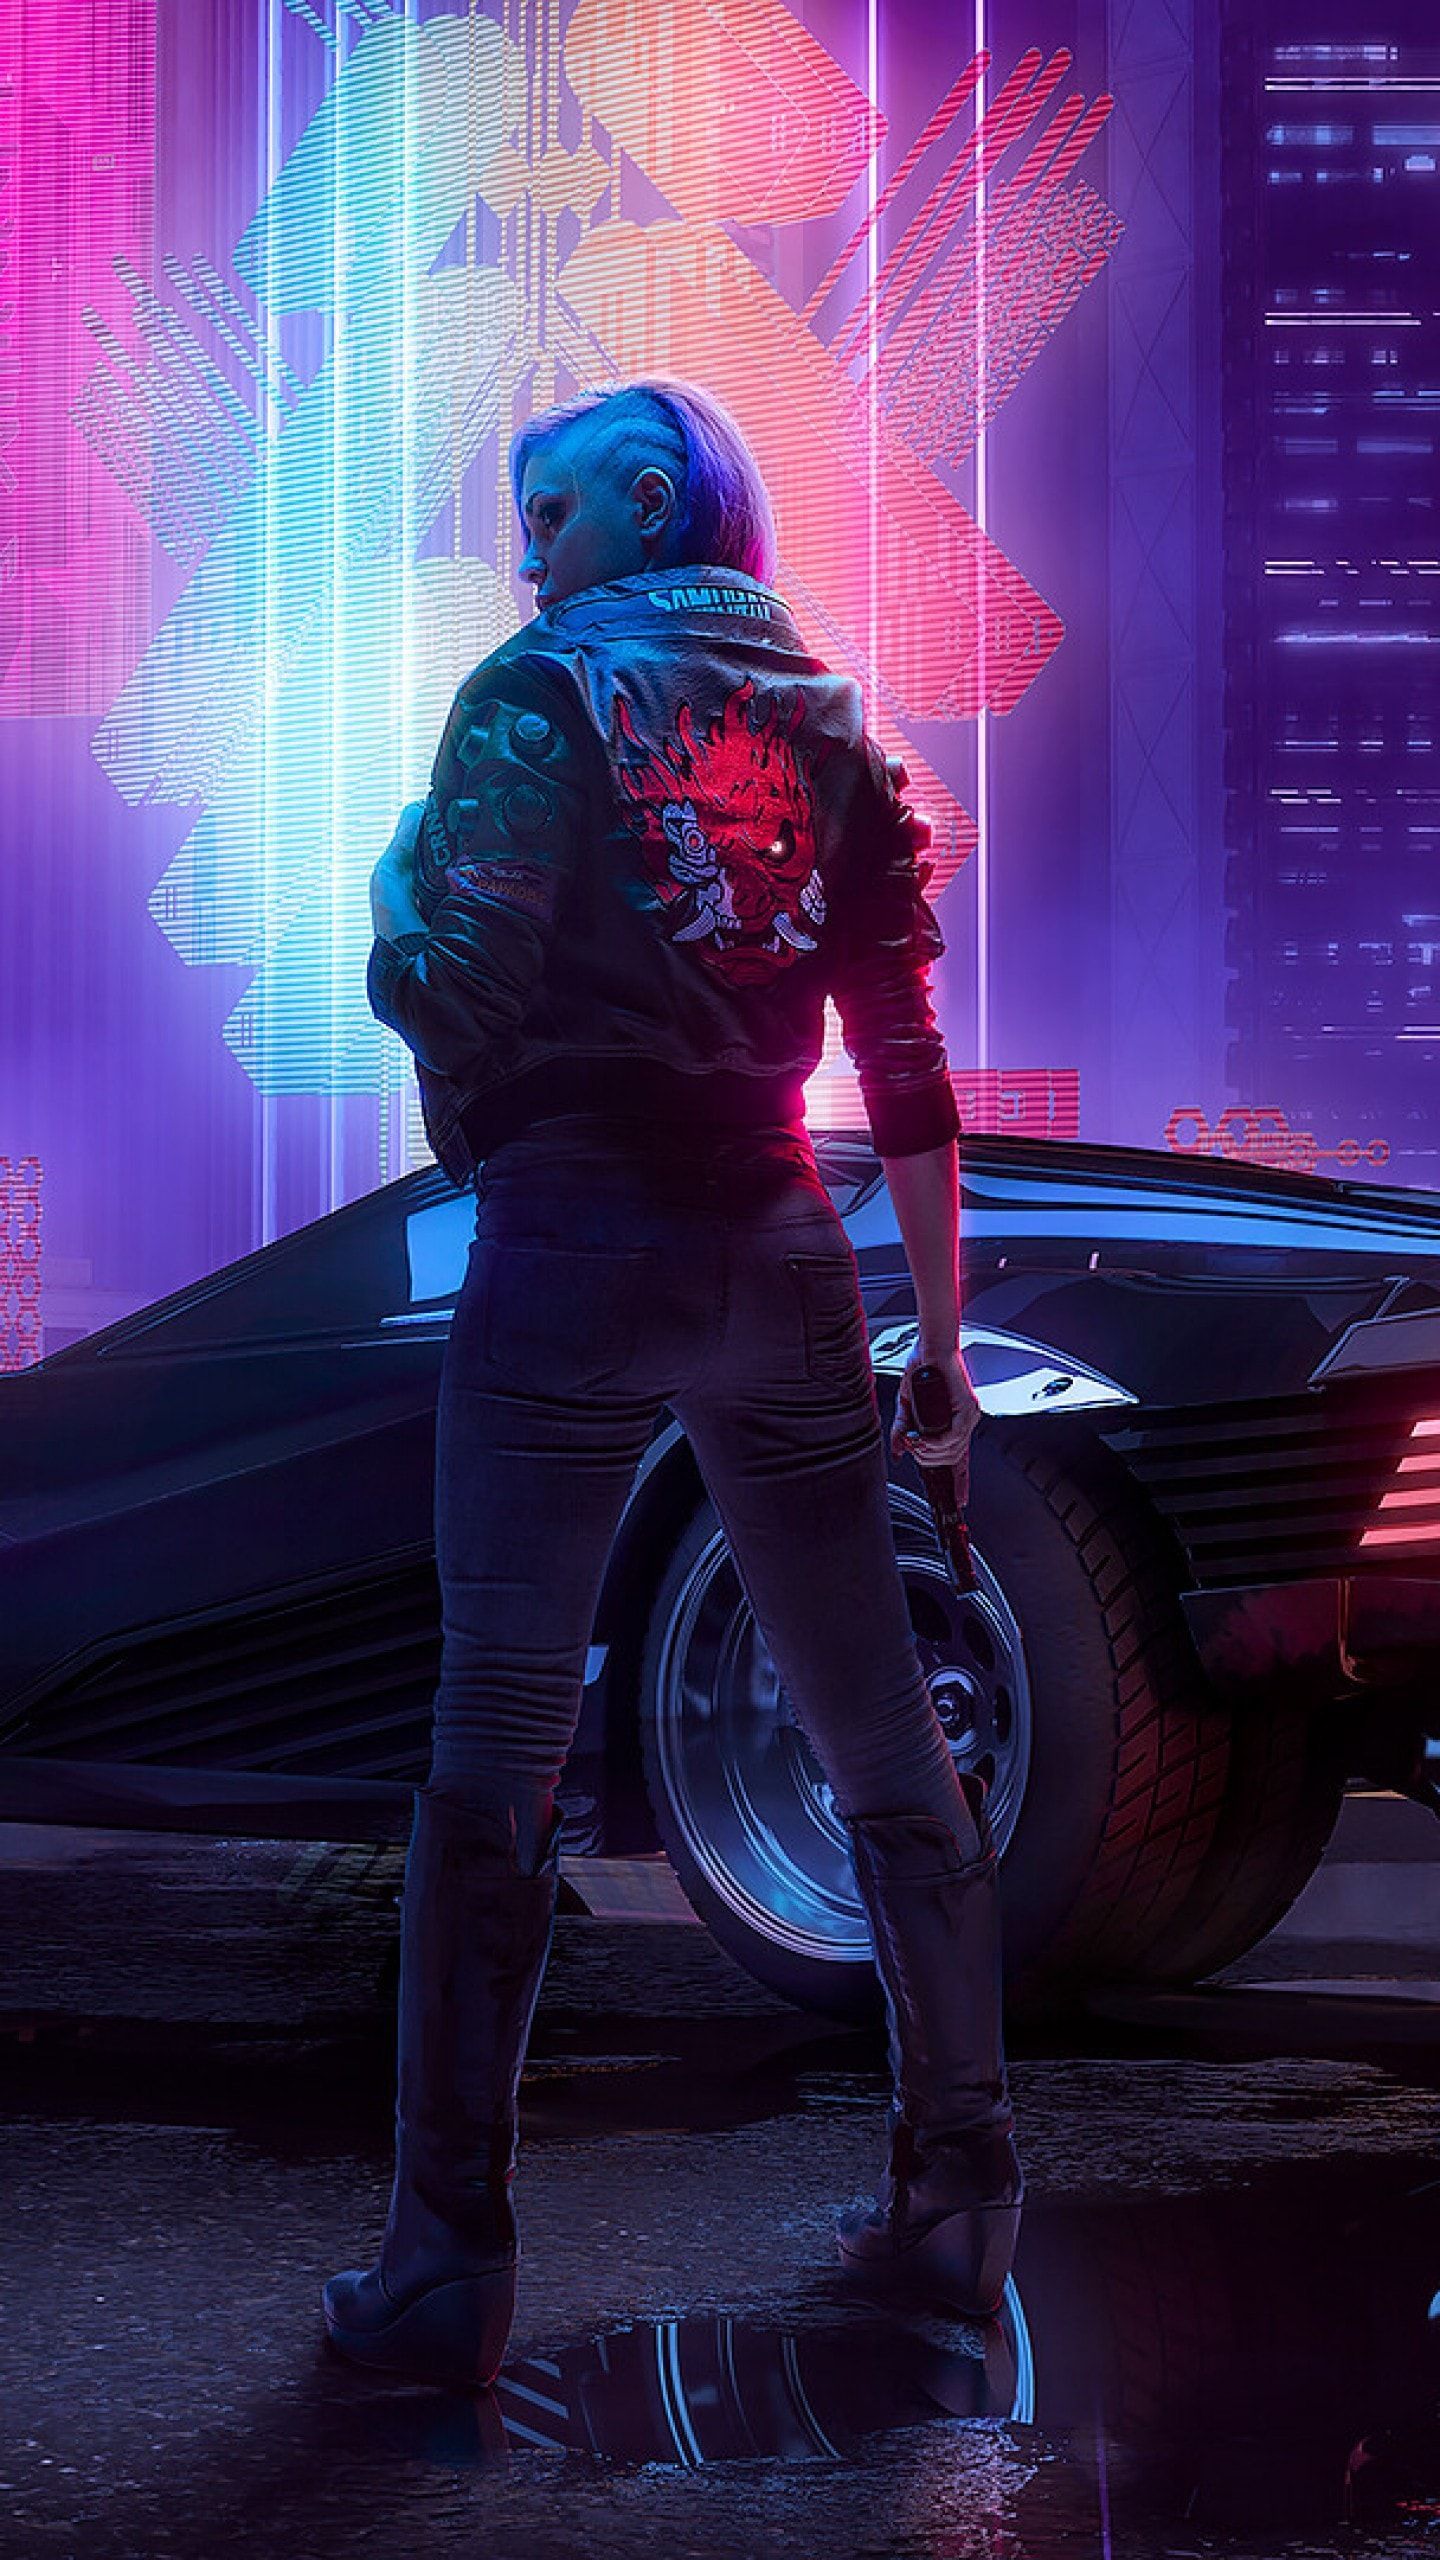 Cyberpunk 2077 wallpaper with a female character standing in front of a car - Cyberpunk